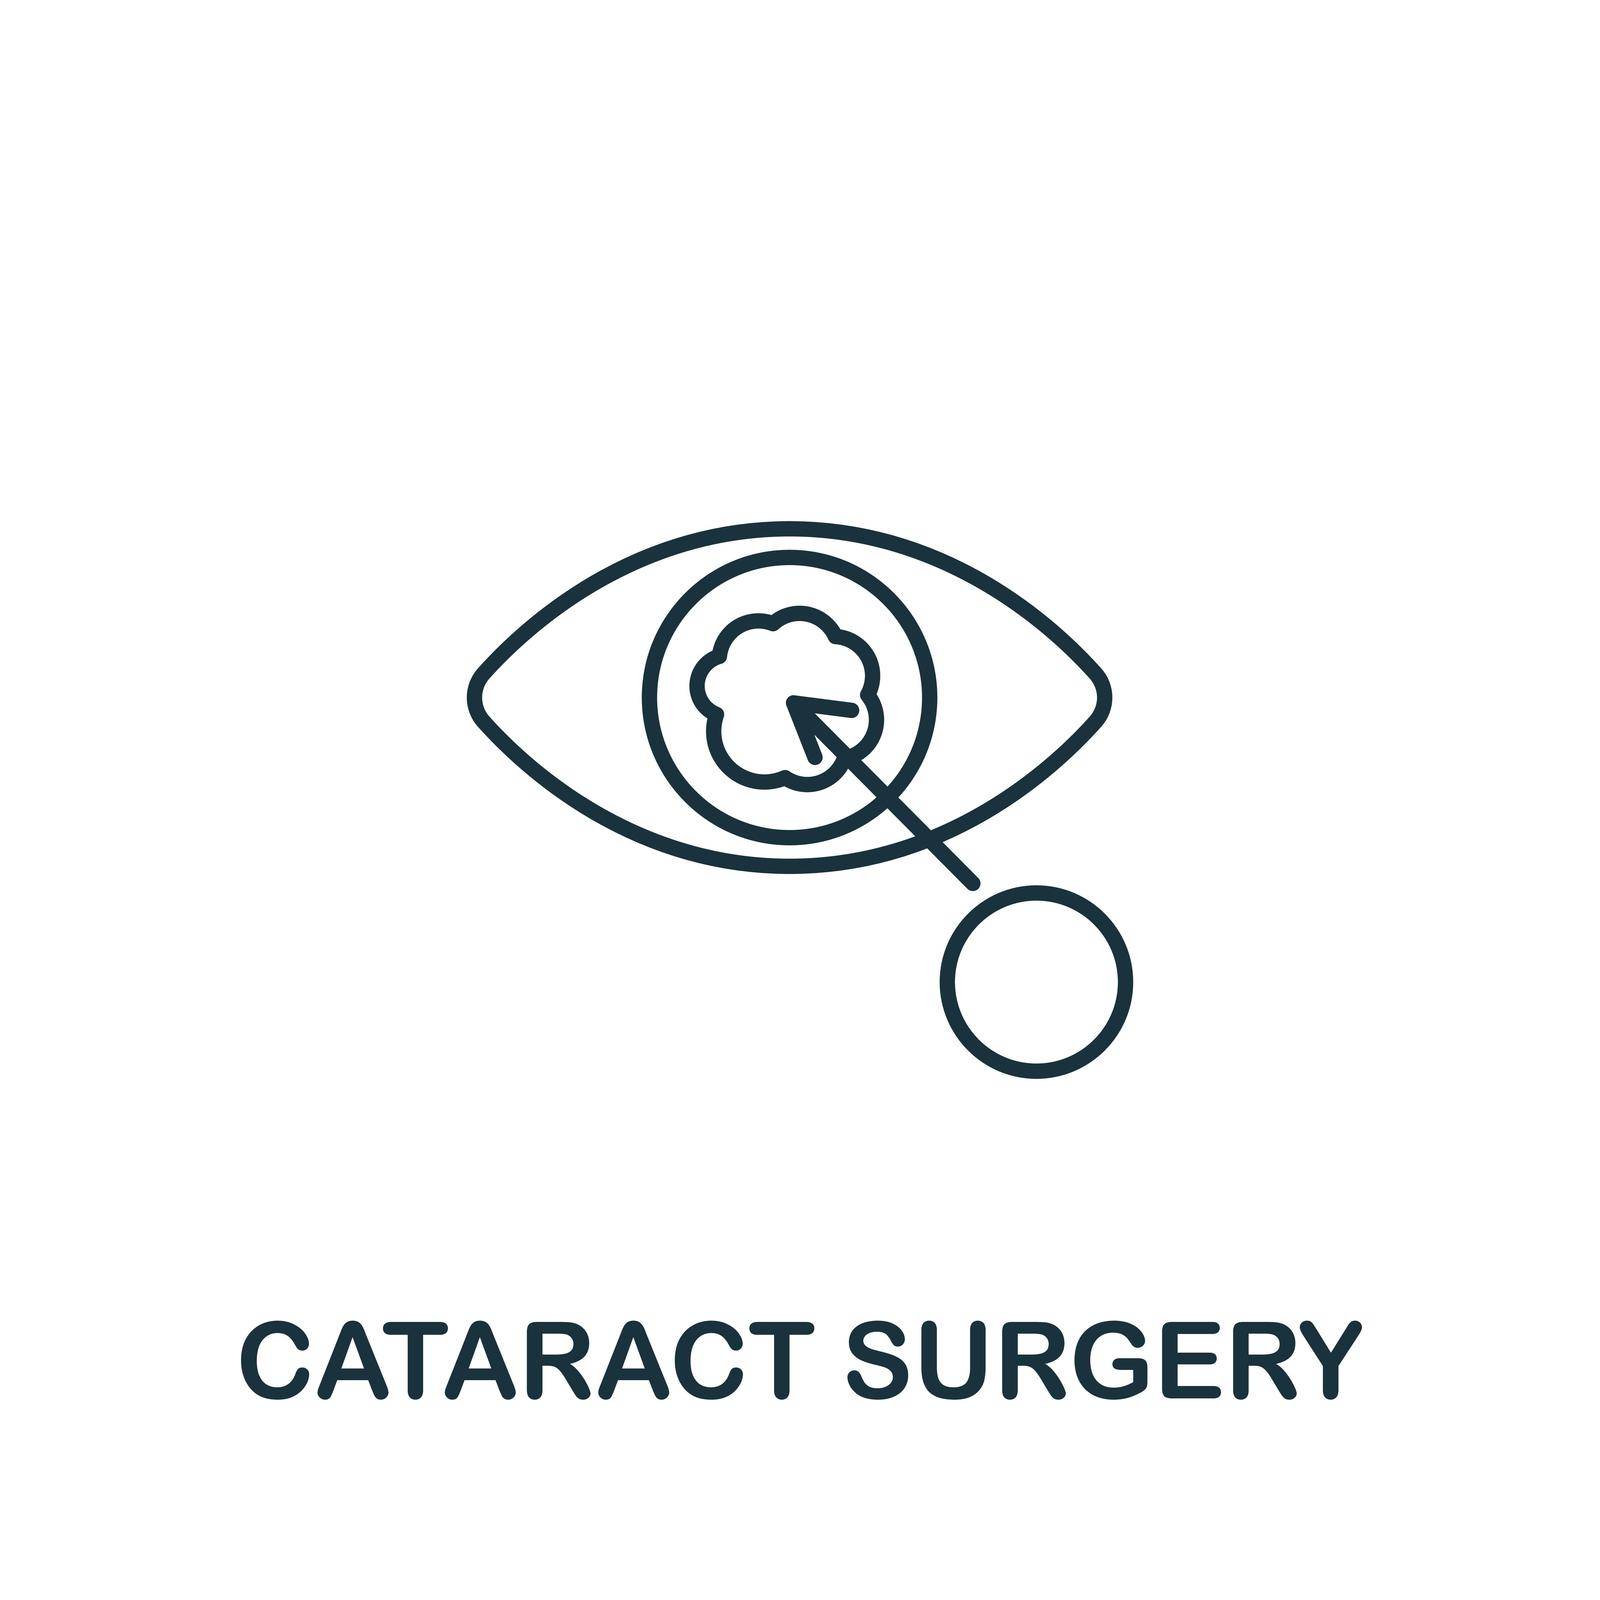 Cataract Surgery icon. Line simple icon for templates, web design and infographics by simakovavector